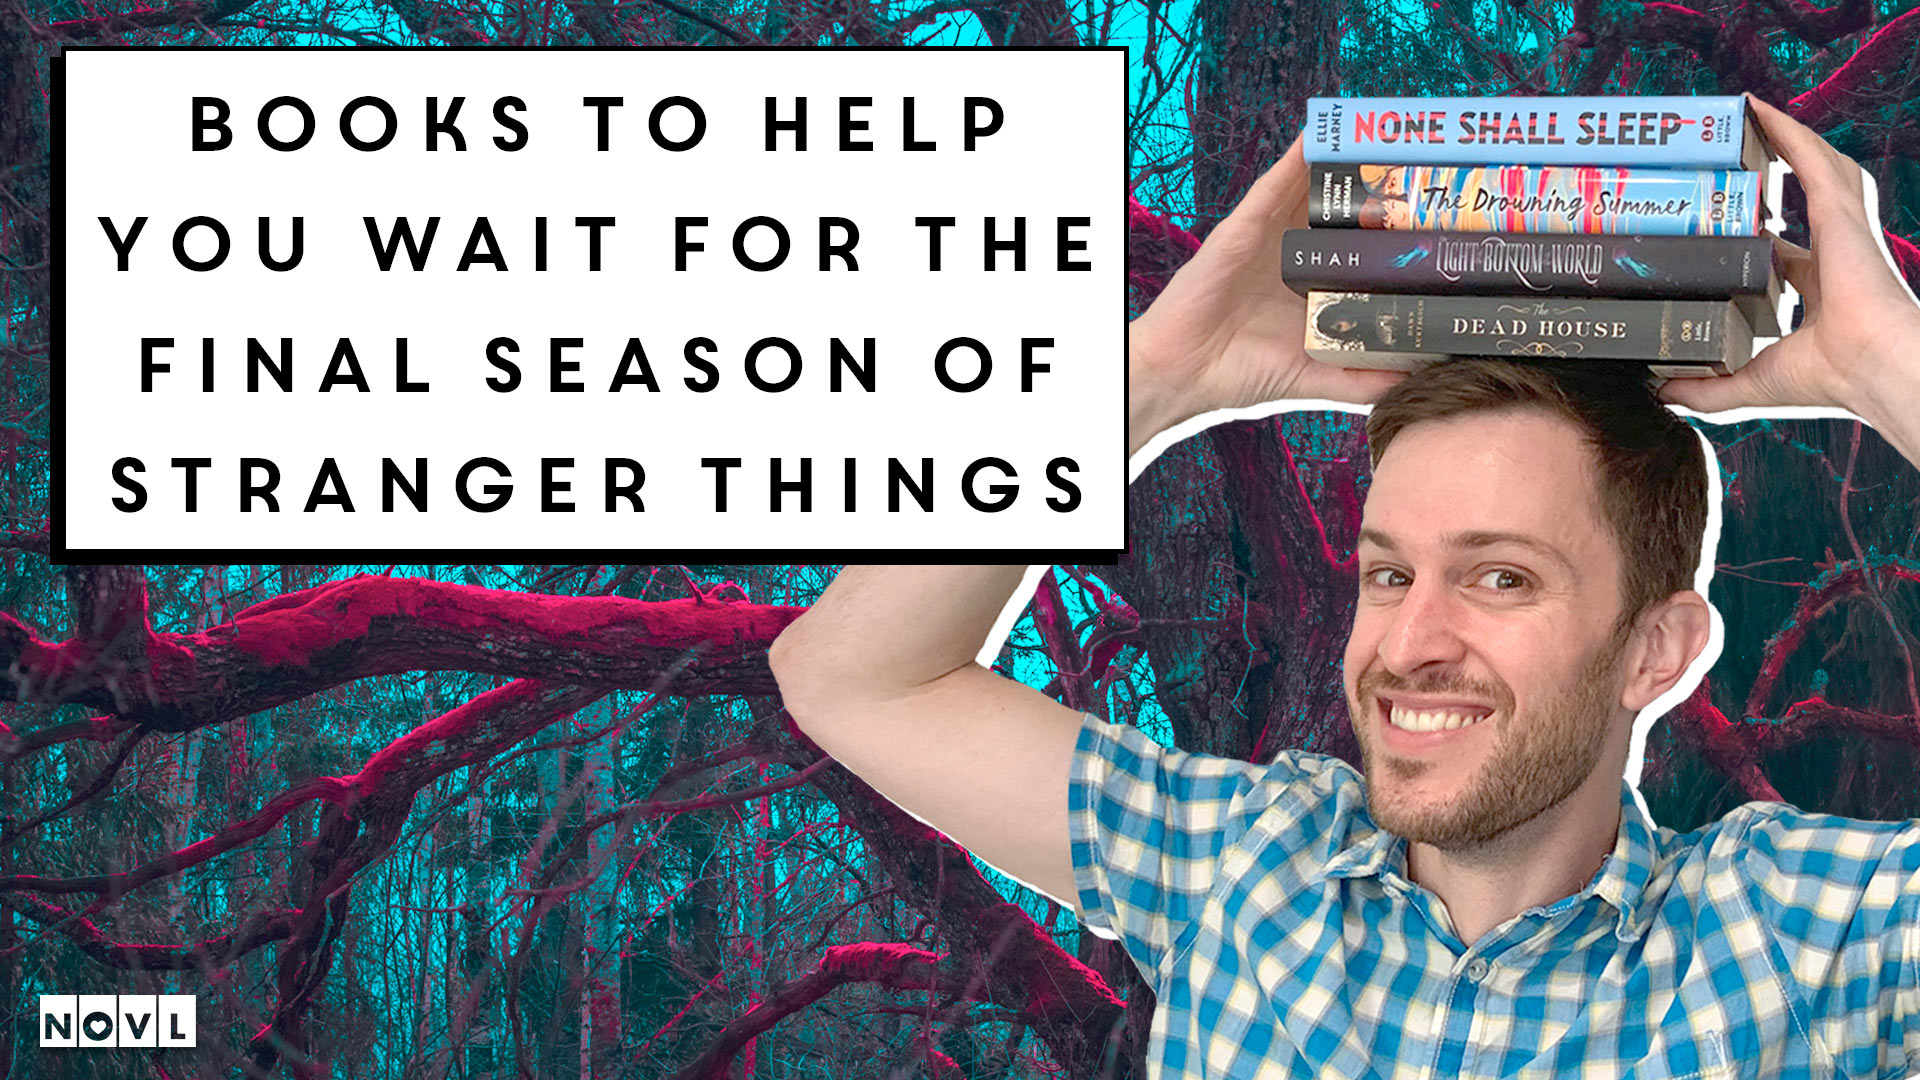 The NOVL Blog, Featured Image for Article: Books to Help You Wait for the Final Season of Stranger Things